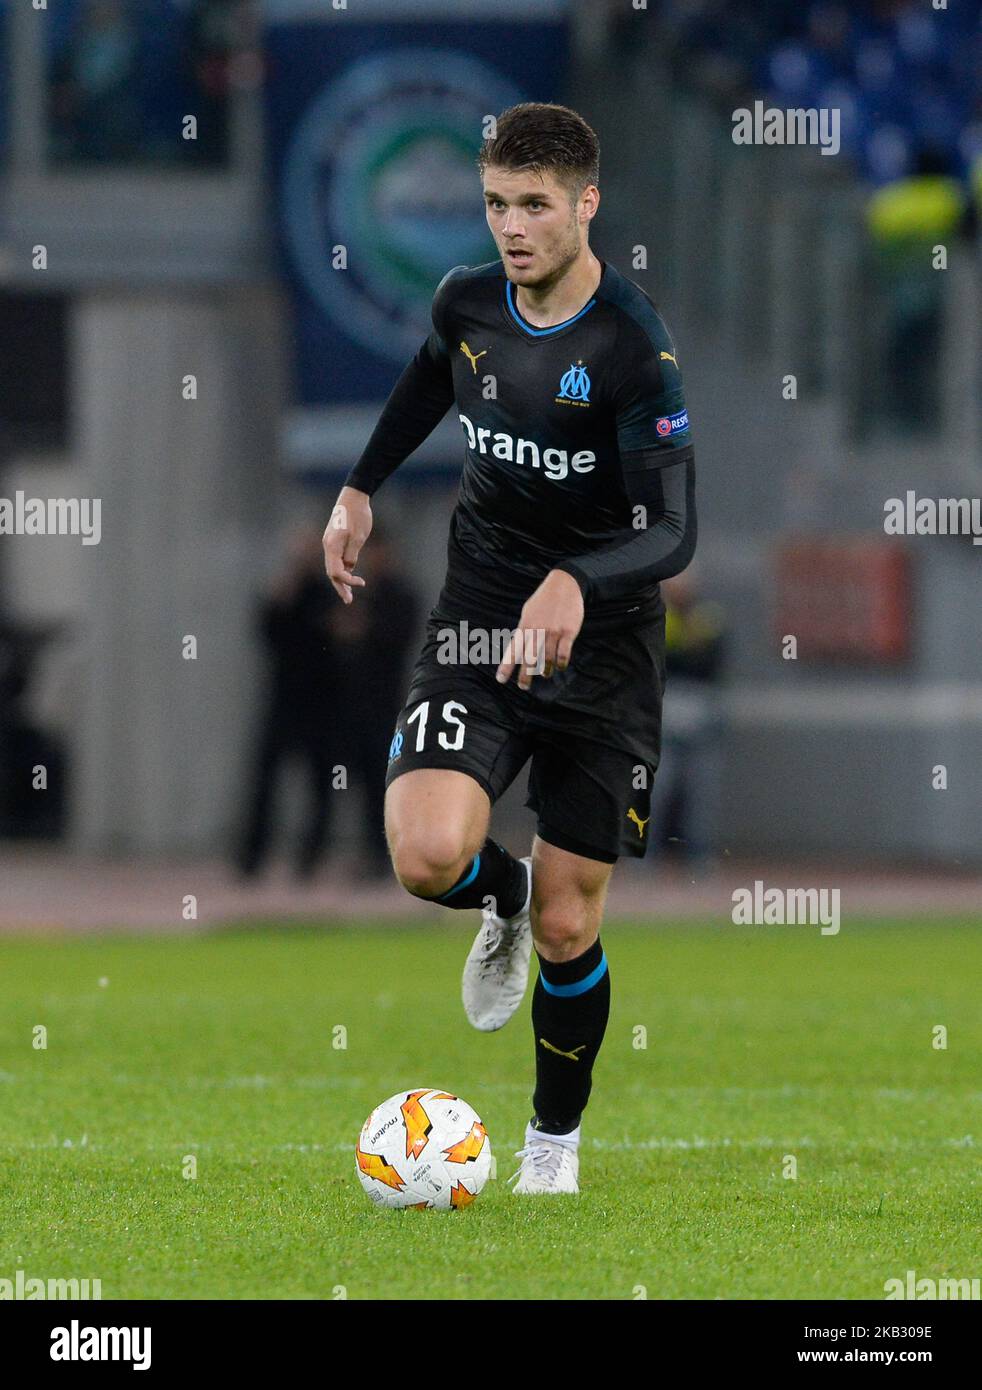 Duje Caleta-Car during the Europe League football match S.S. Lazio vs Olympique de Marseille at the Olympic Stadium in Rome, on november 08, 2018. (Photo by Silvia Lore/NurPhoto) Stock Photo